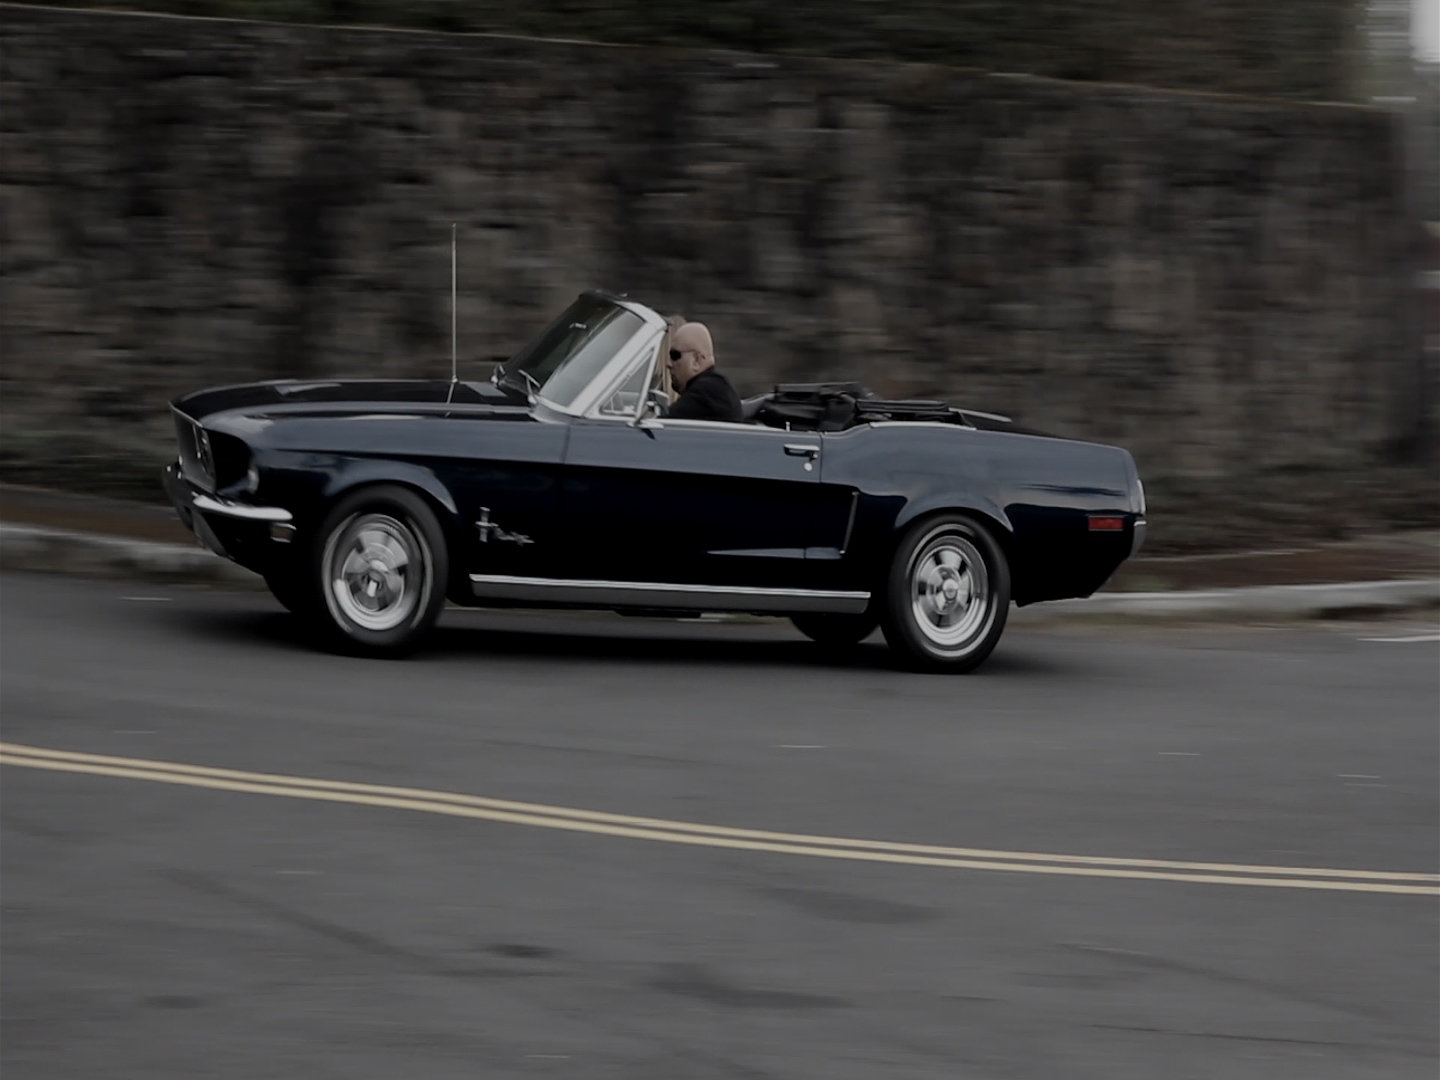 Bullitt (Richard Gonzalez) on his way to the Cemetery with Lani (Mary Croix) in the 68 Mustang